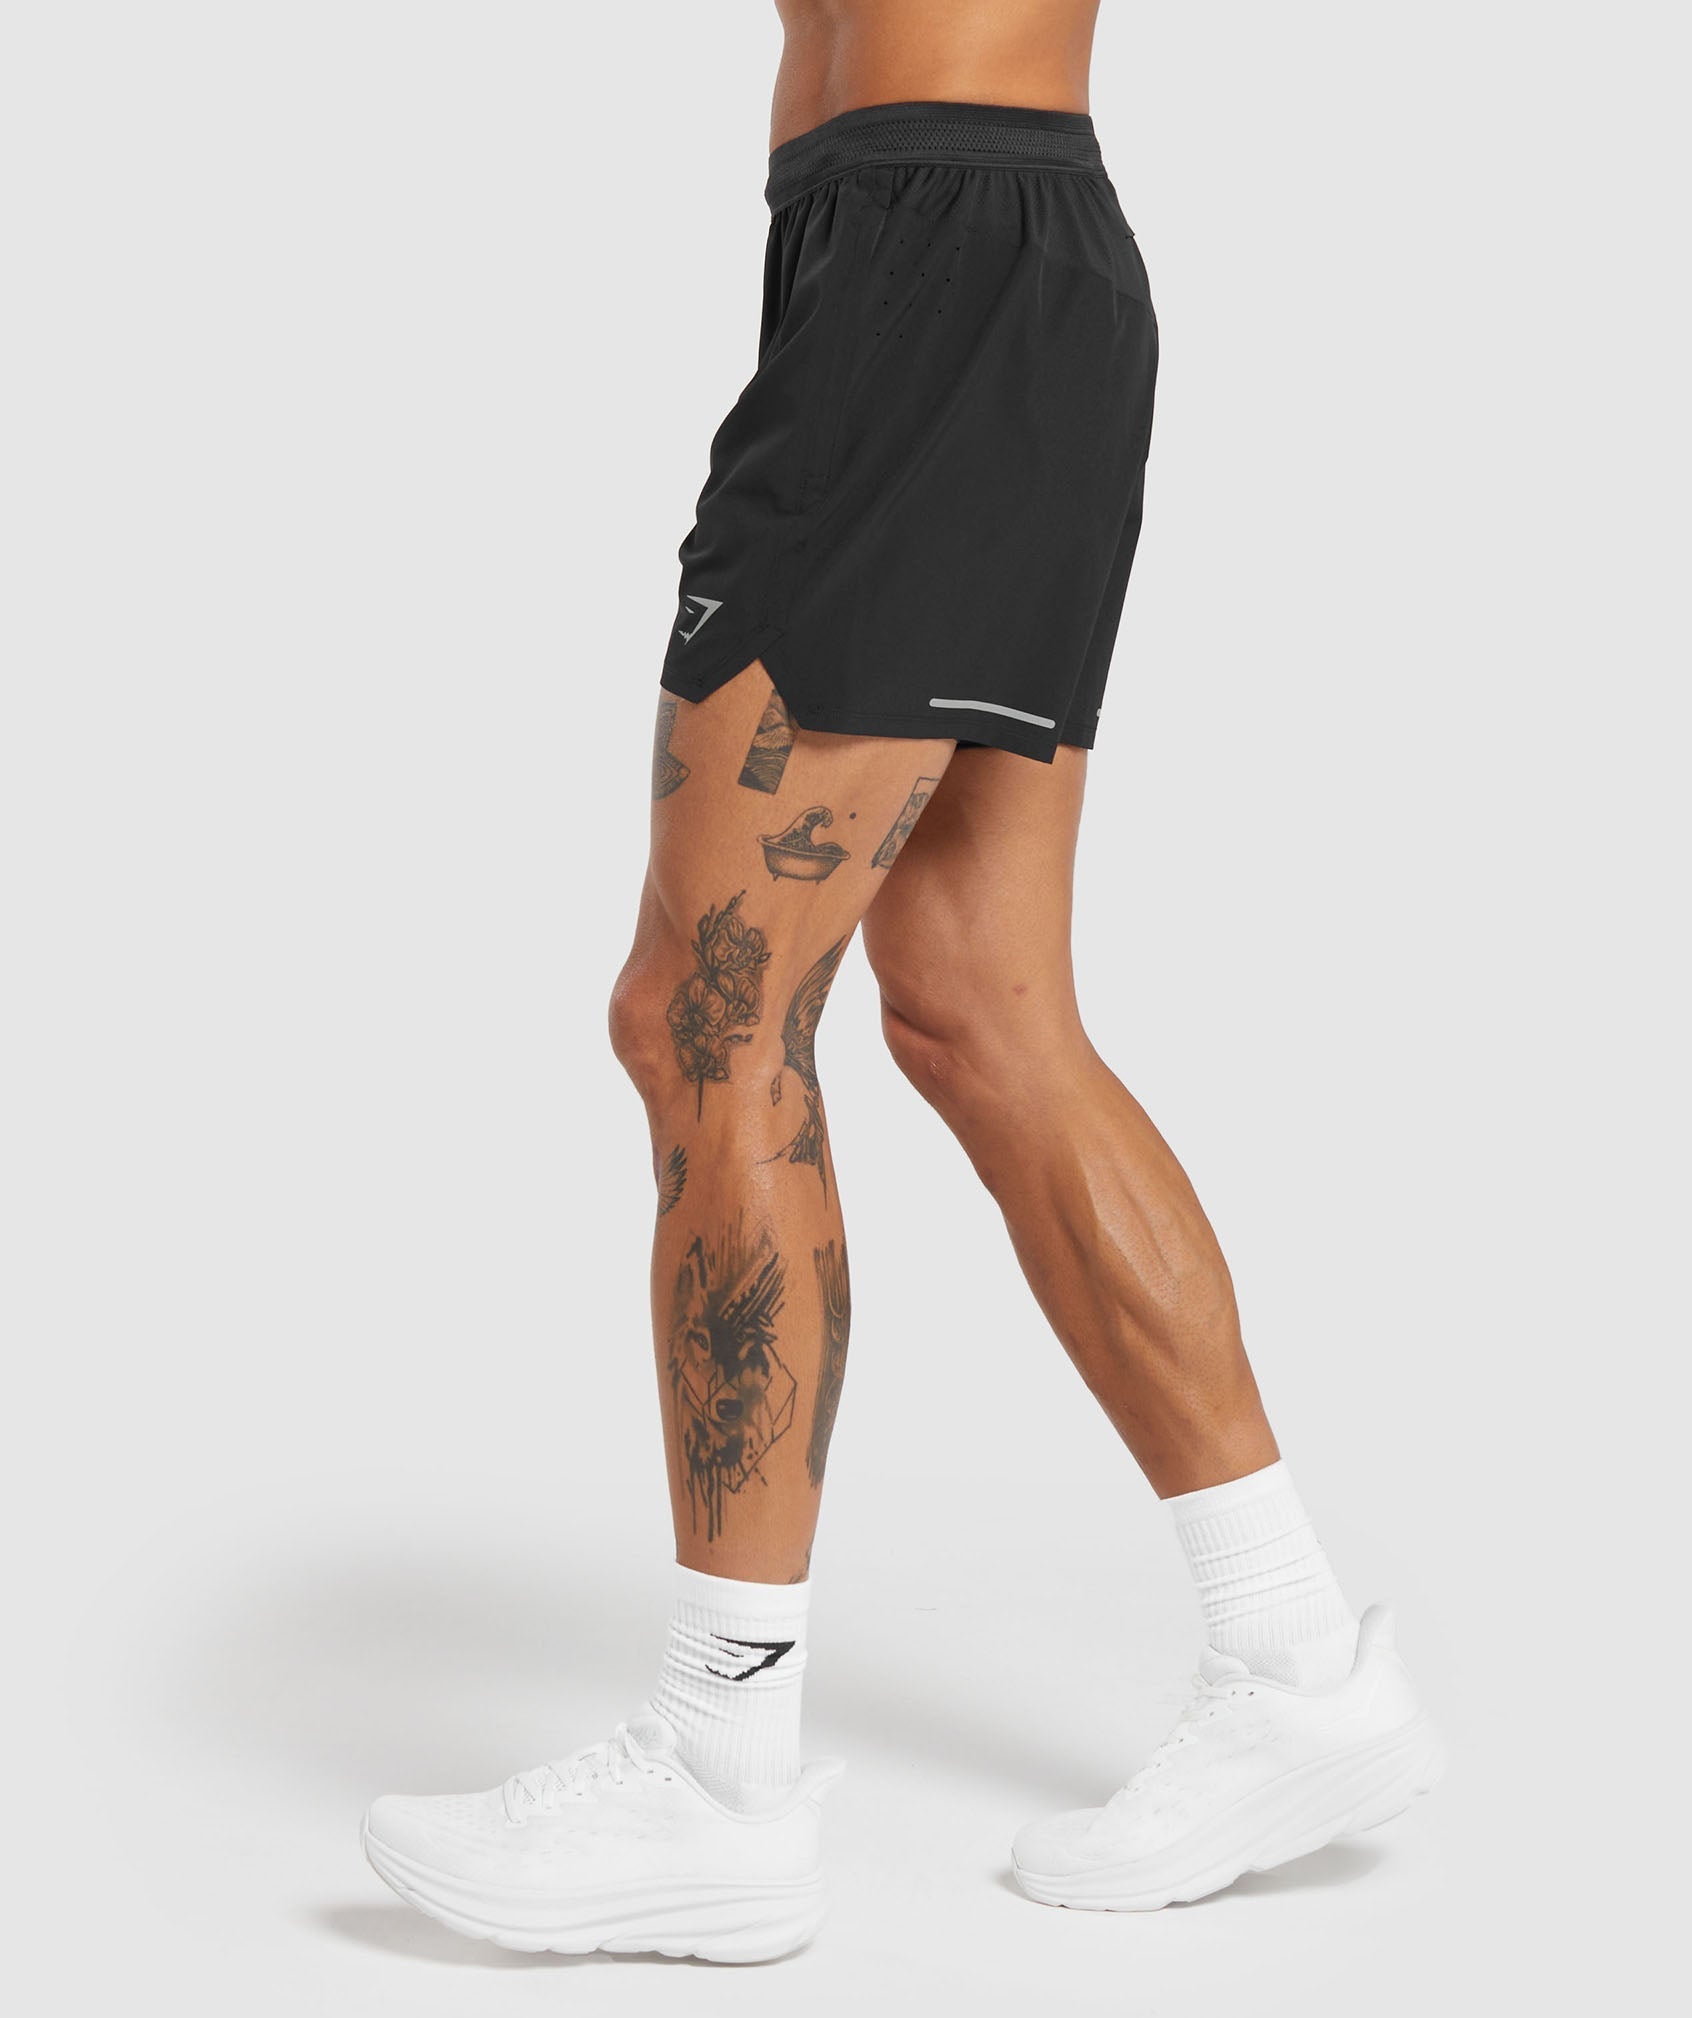 Speed 5" Shorts in Black - view 4